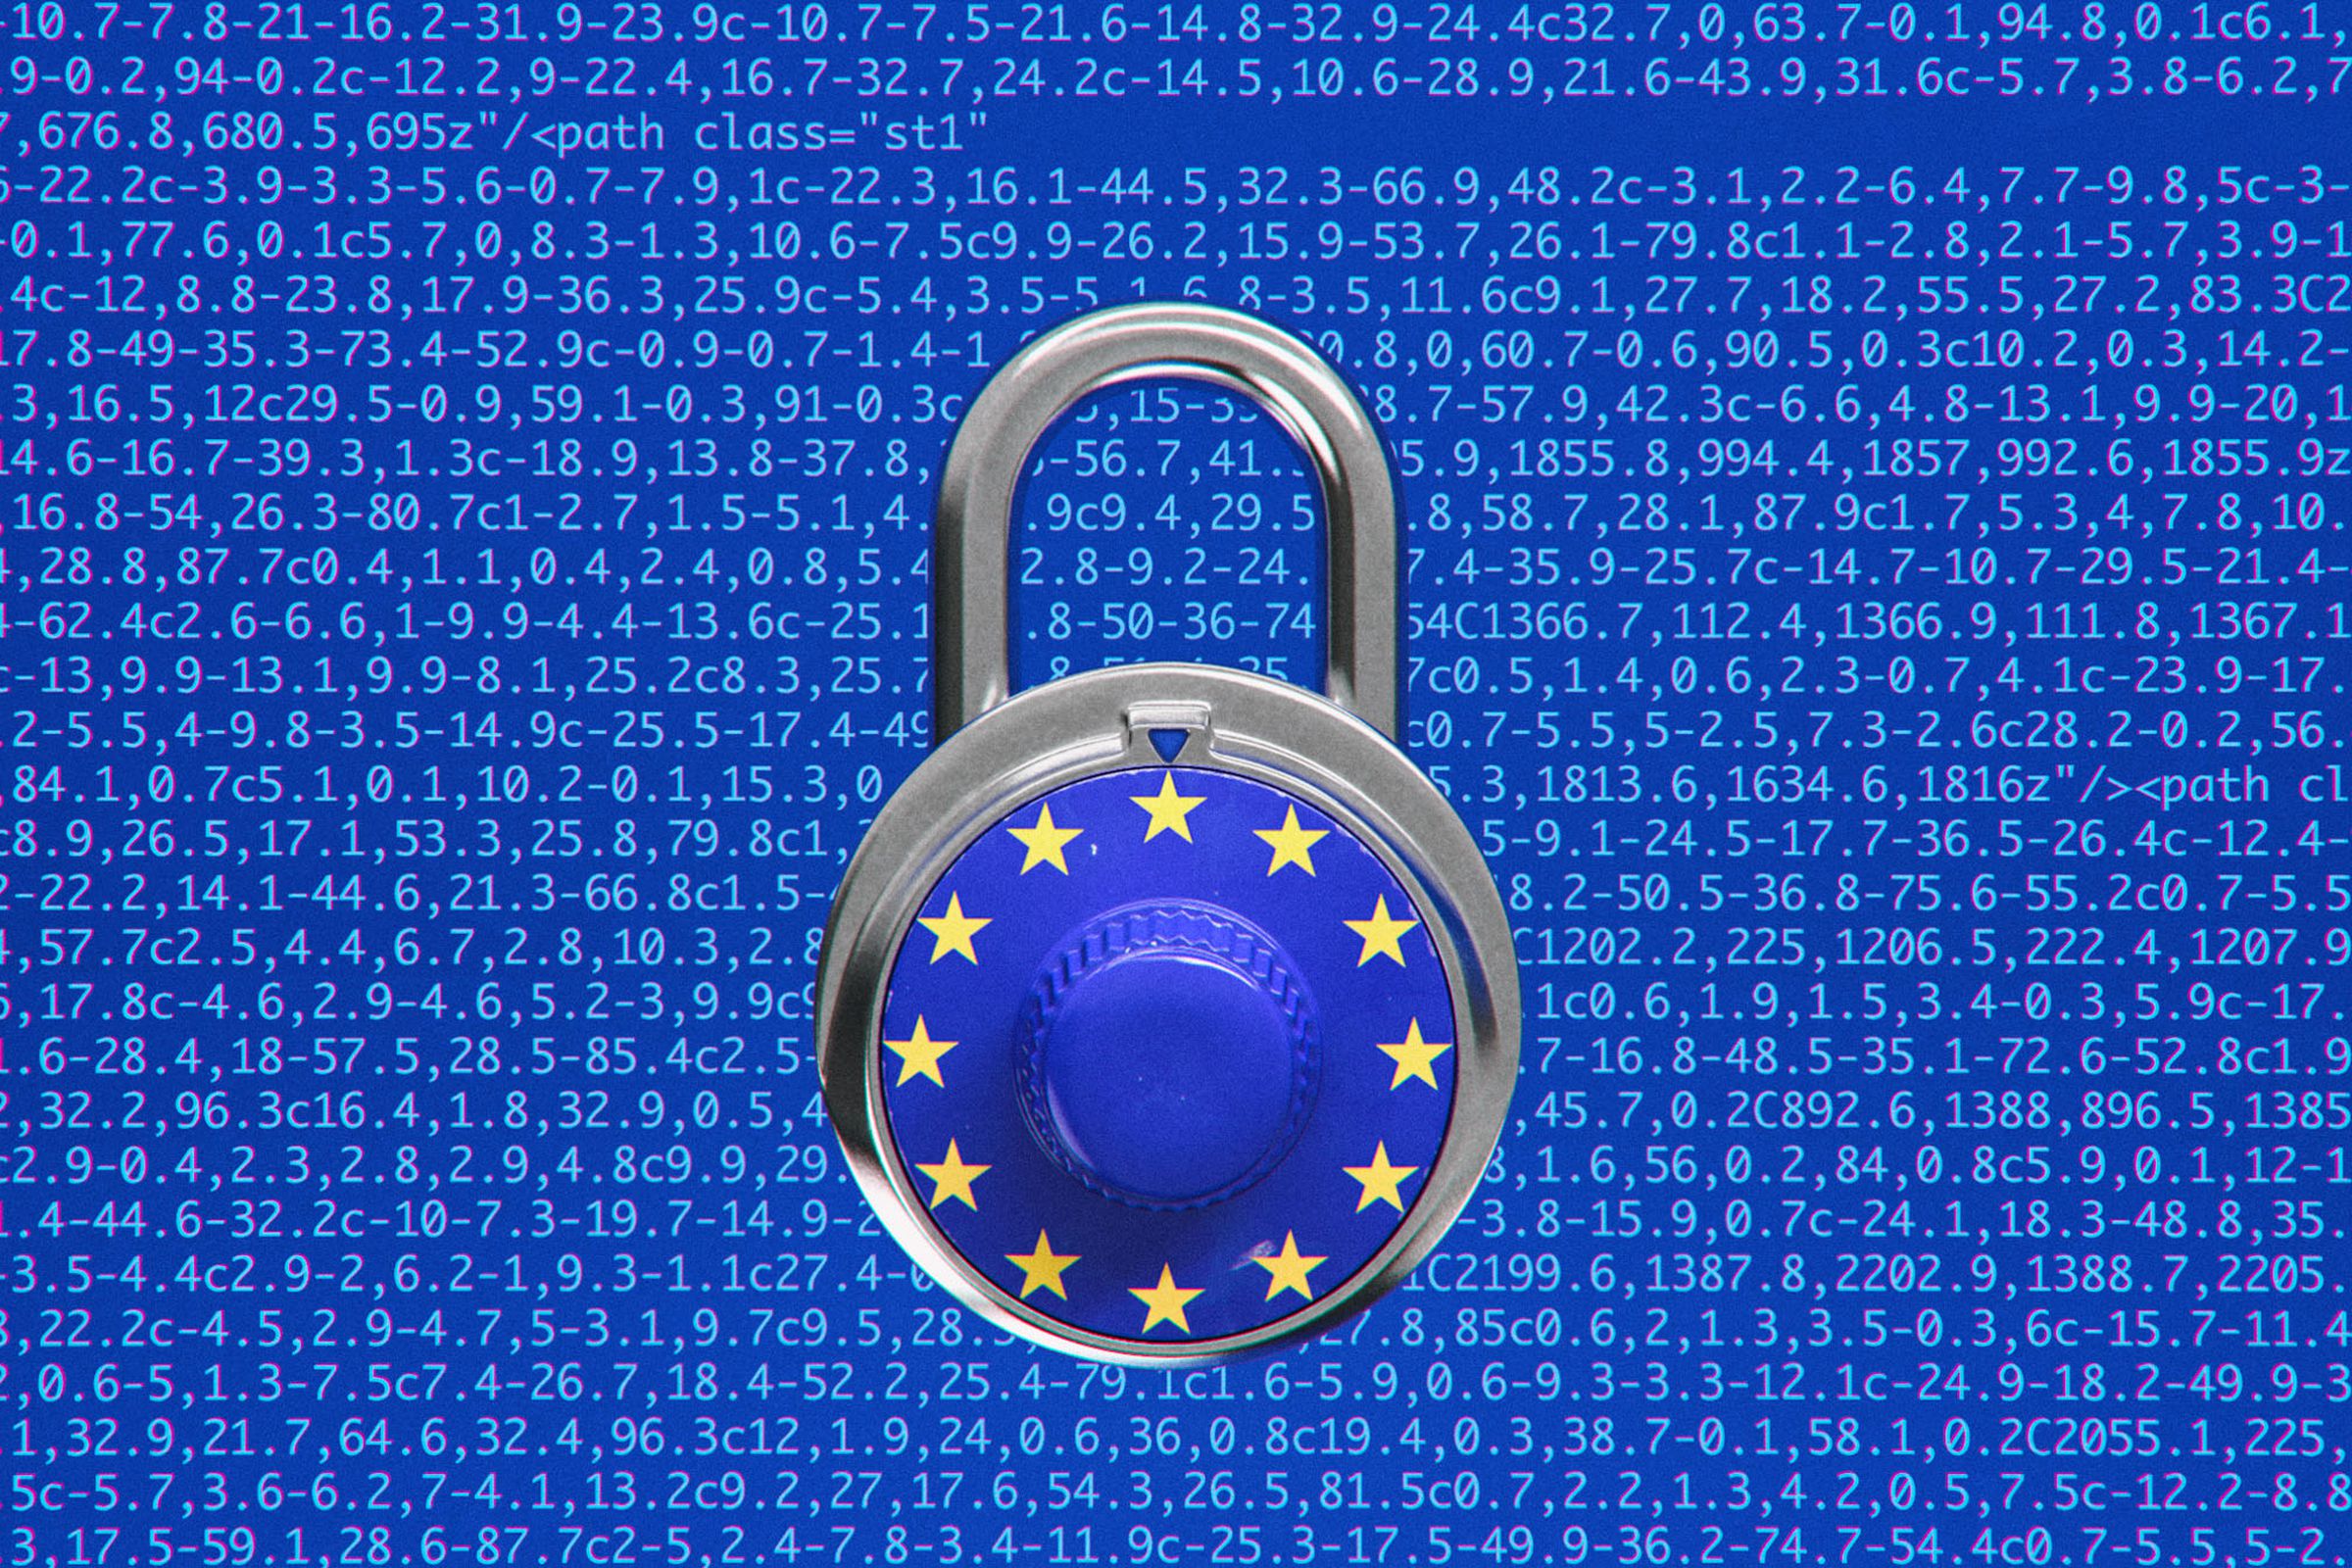 An image showing a lock with the European Union’s flag